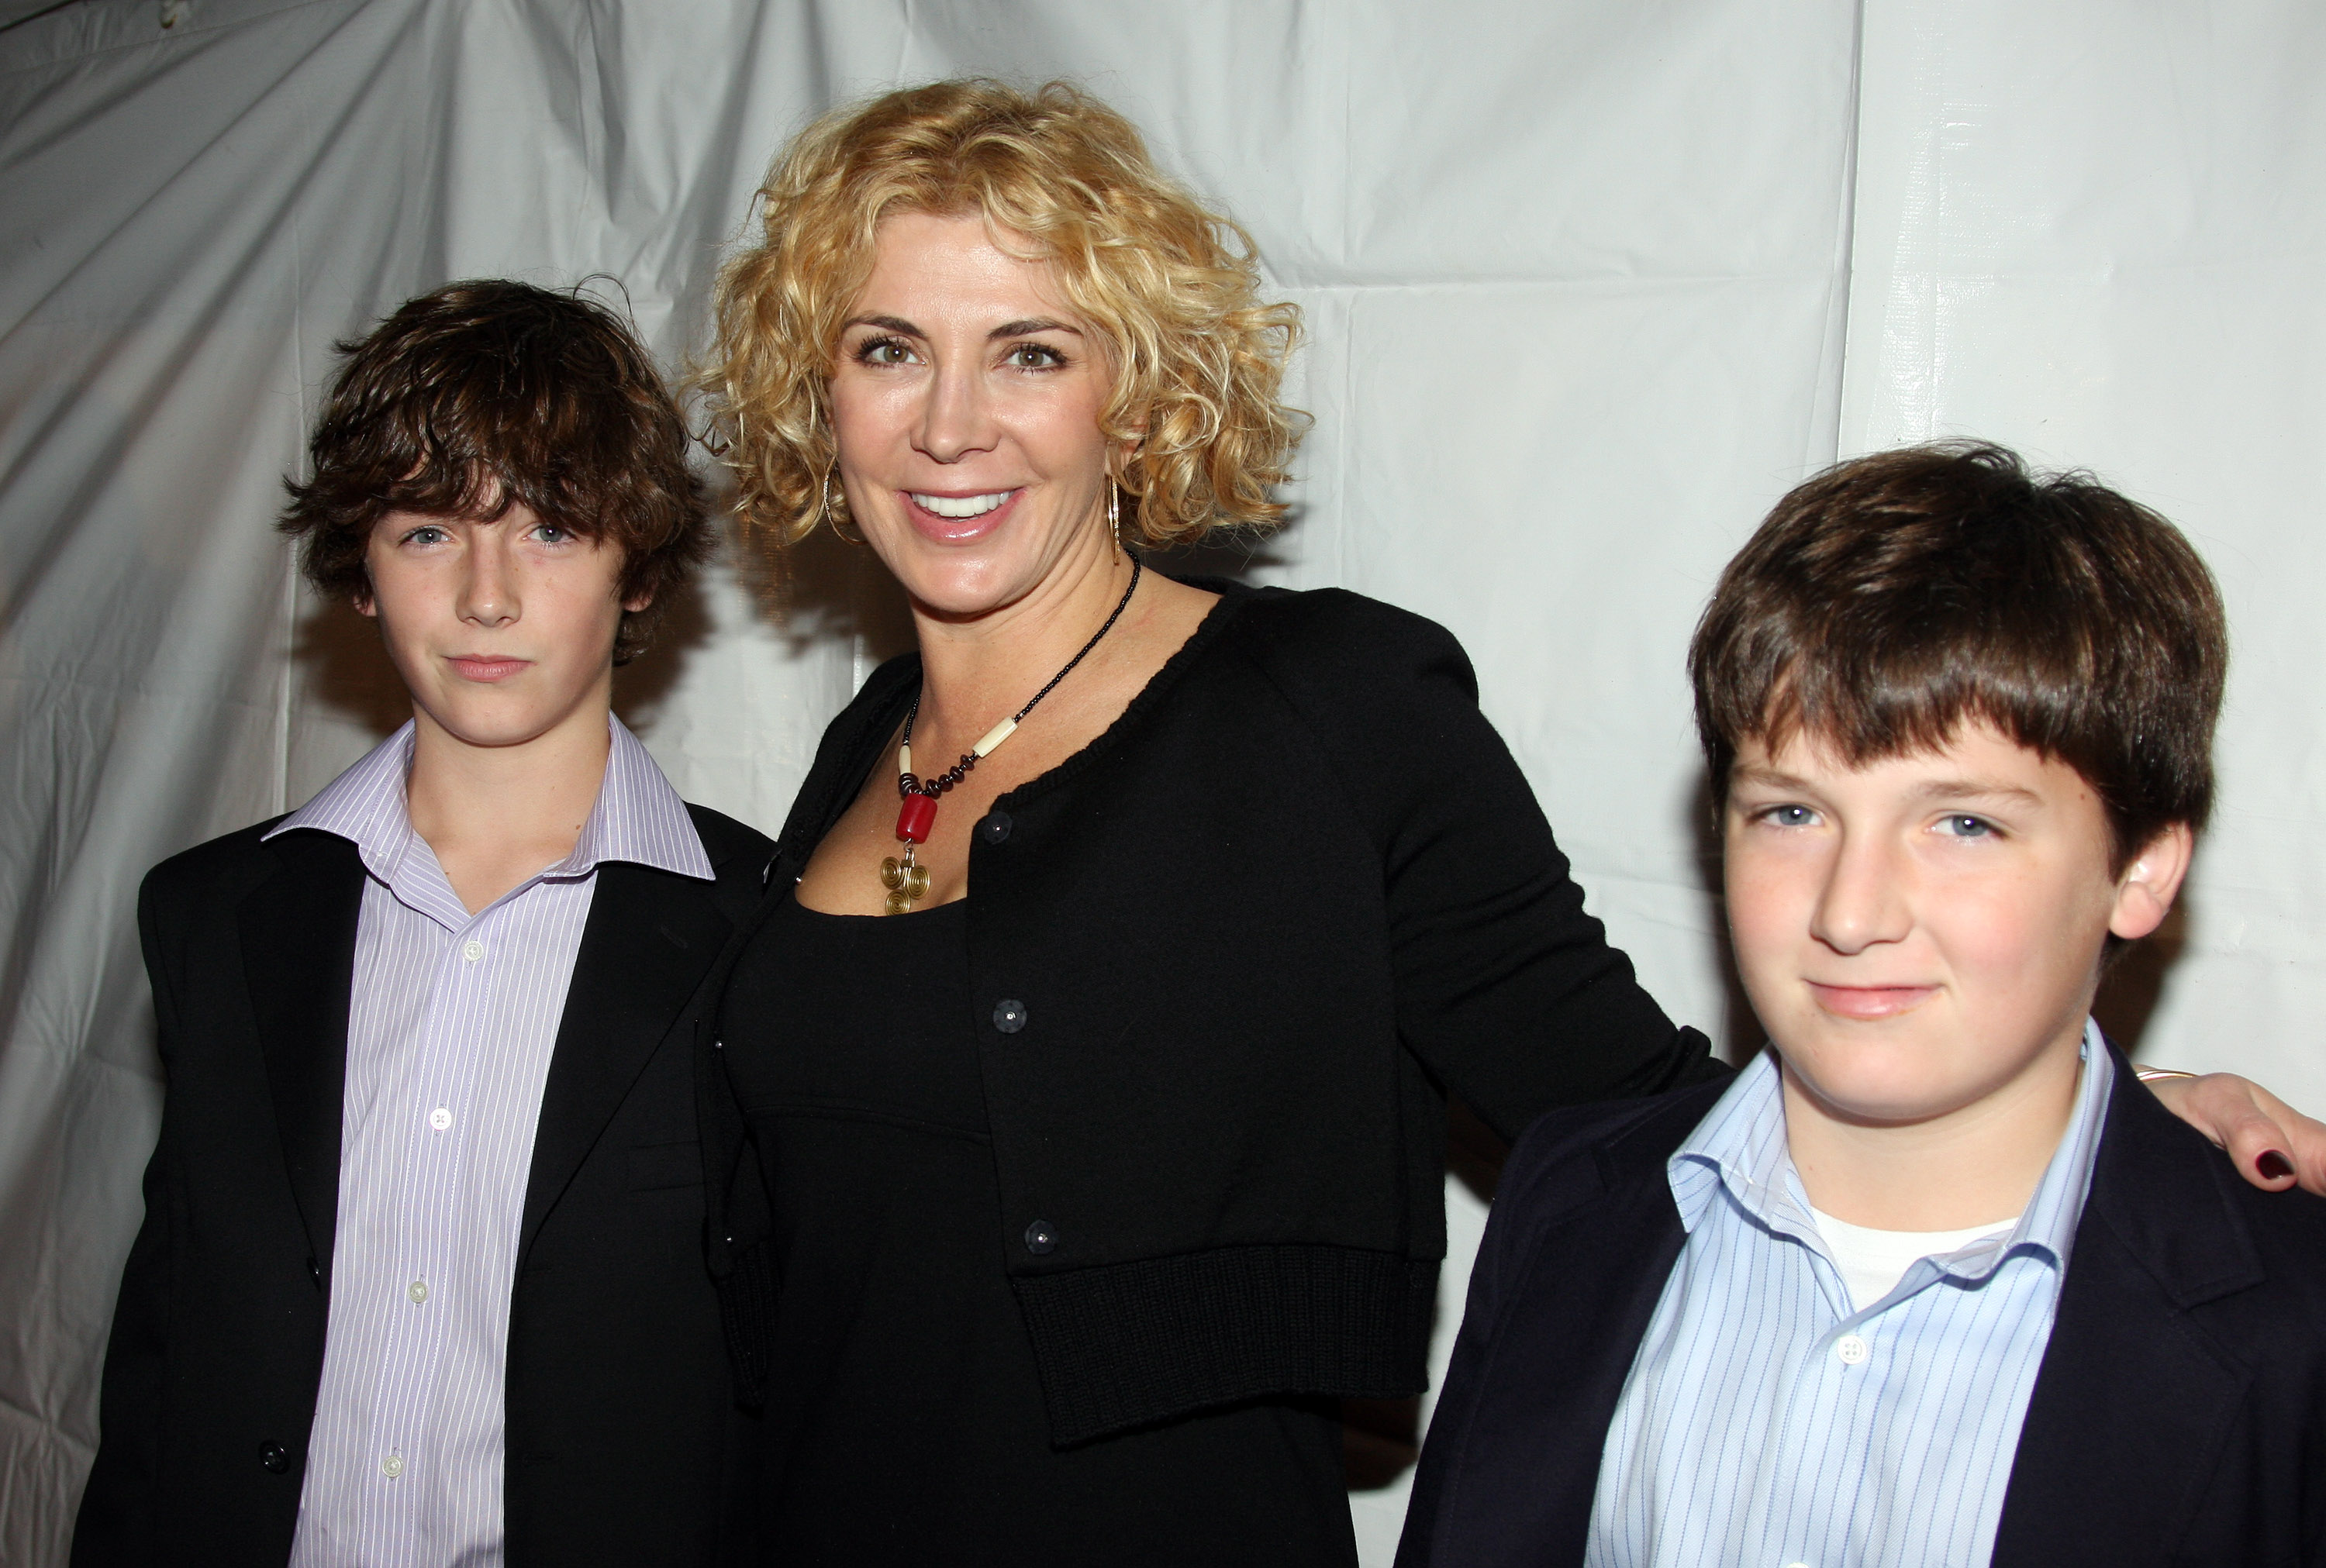 Natasha Richardson and her sons Micheal Neeson (L) and Daniel Neeson (R) attend the "Billy Elliot The Musical" opening night on Broadway at the Imperial Theatre on November 13, 2008, in New York City | Source: Getty Images.